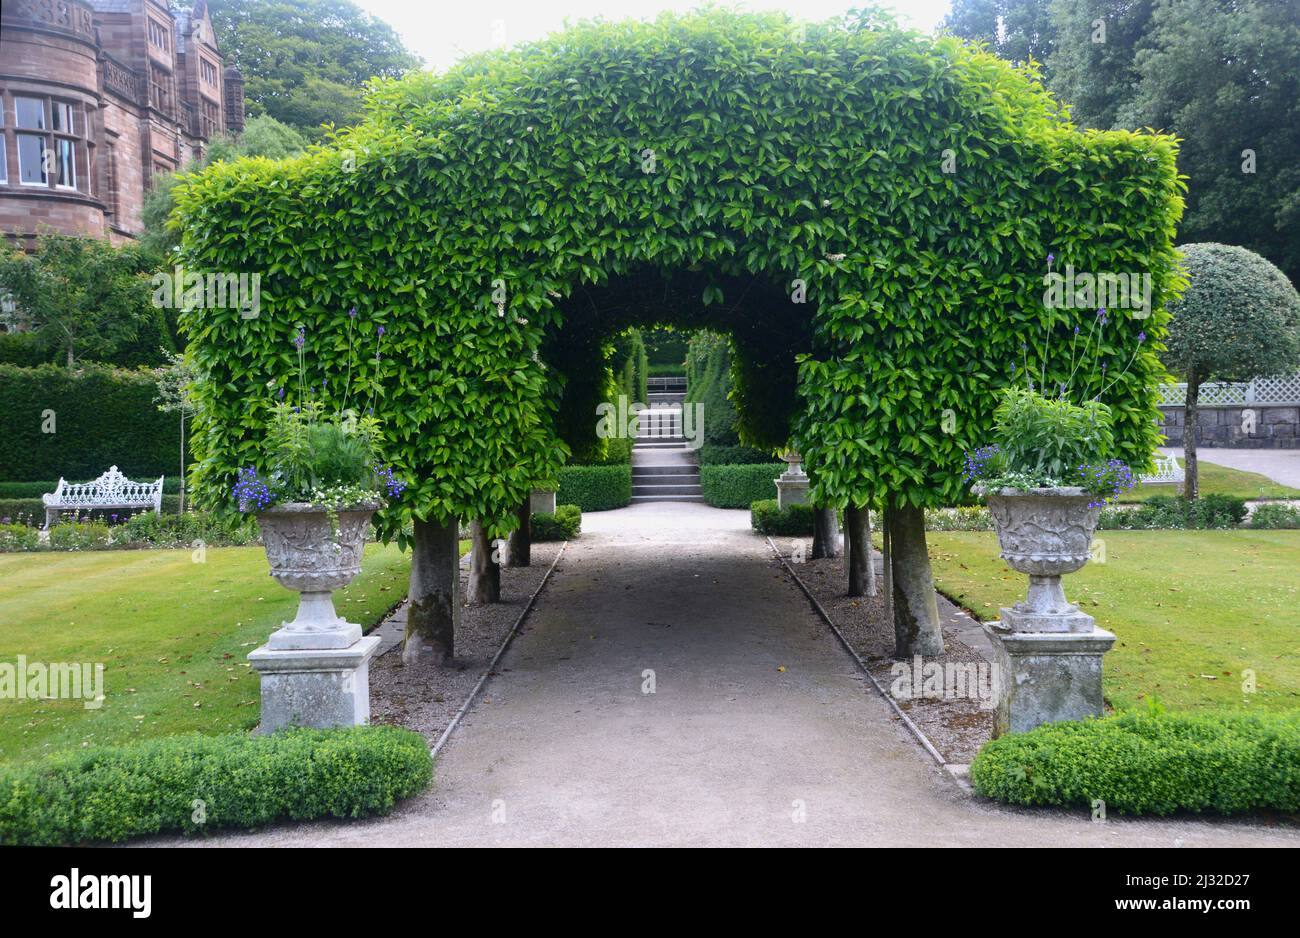 The Central Arbor Hedge Tunnel  in the Summer Garden at Holker Hall & Gardens, Lake District, Cumbria, England, UK. Stock Photo